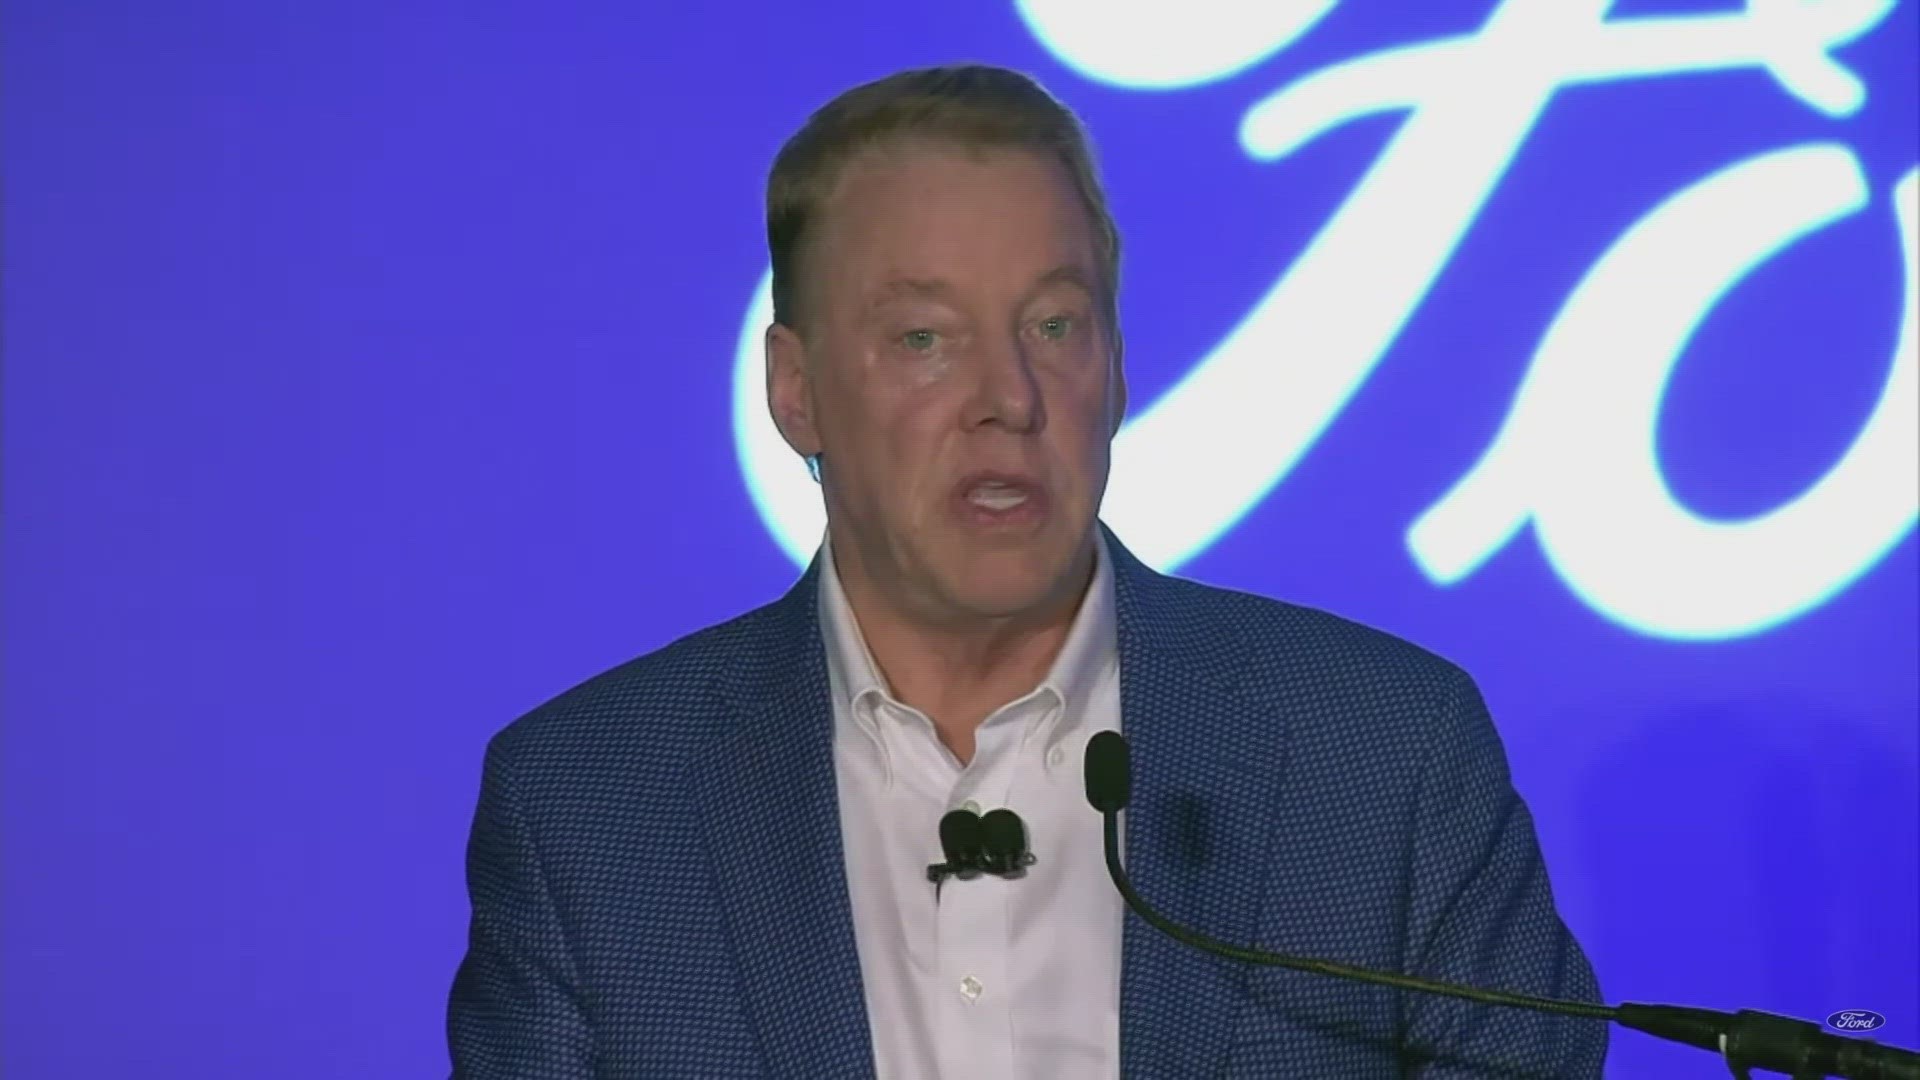 Ford said the union shut down at the Kentucky Truck Plant in Louisville will cripple the industry and local communities.